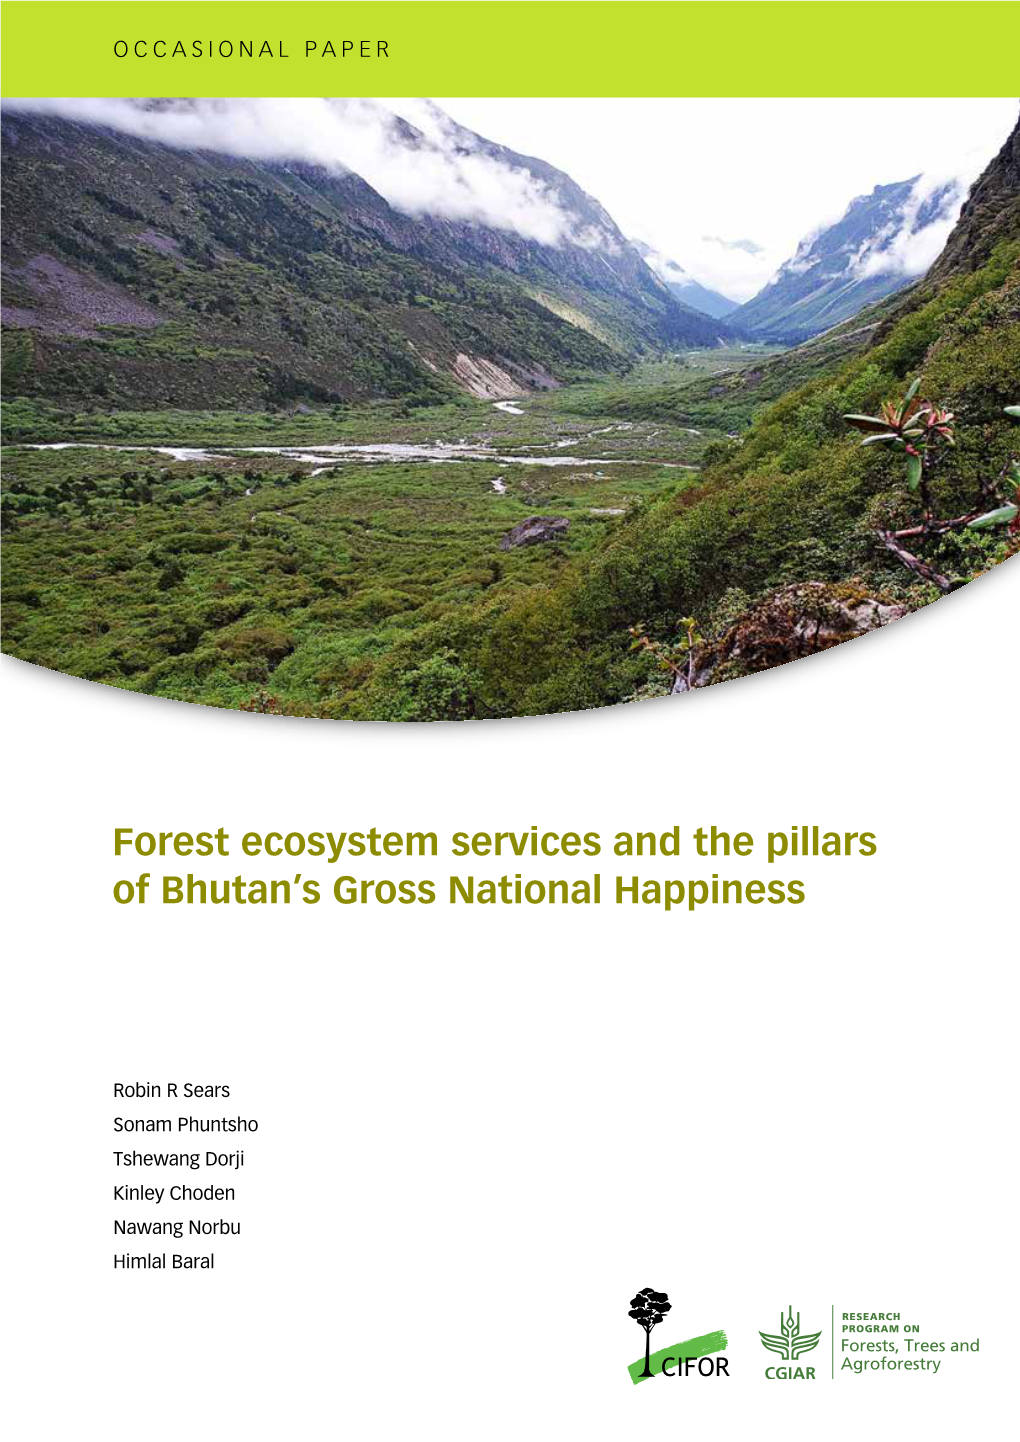 Forest Ecosystem Services and the Pillars of Bhutan's Gross National Happiness